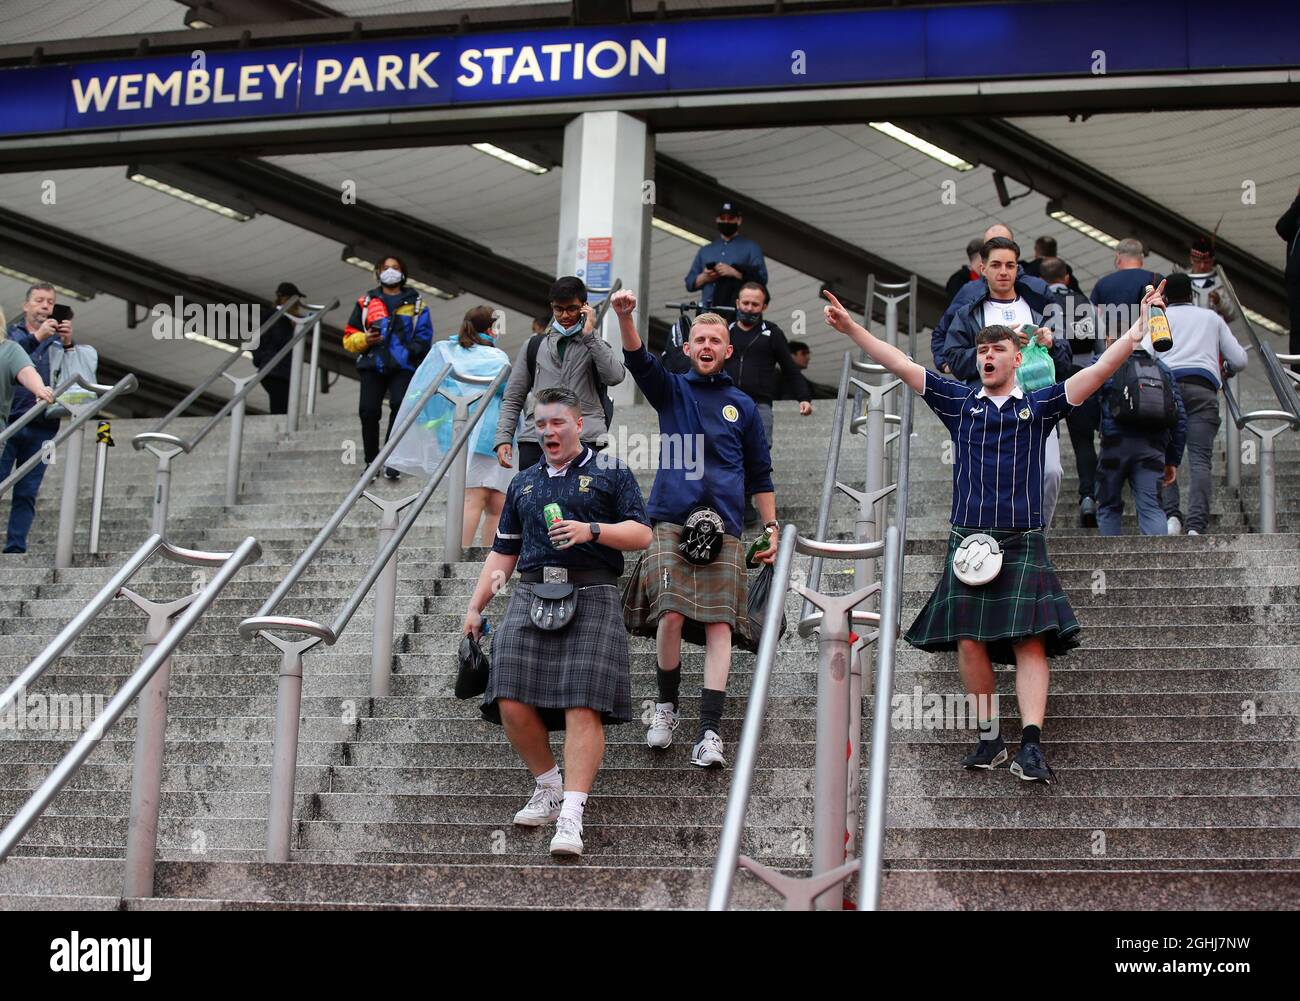 London, England, 18th June 2021. Scotland fans arrive from the Wembley Park Station before the UEFA European Championships match at Wembley Stadium, London. Picture credit should read: David Klein / Sportimage via PA Images Stock Photo